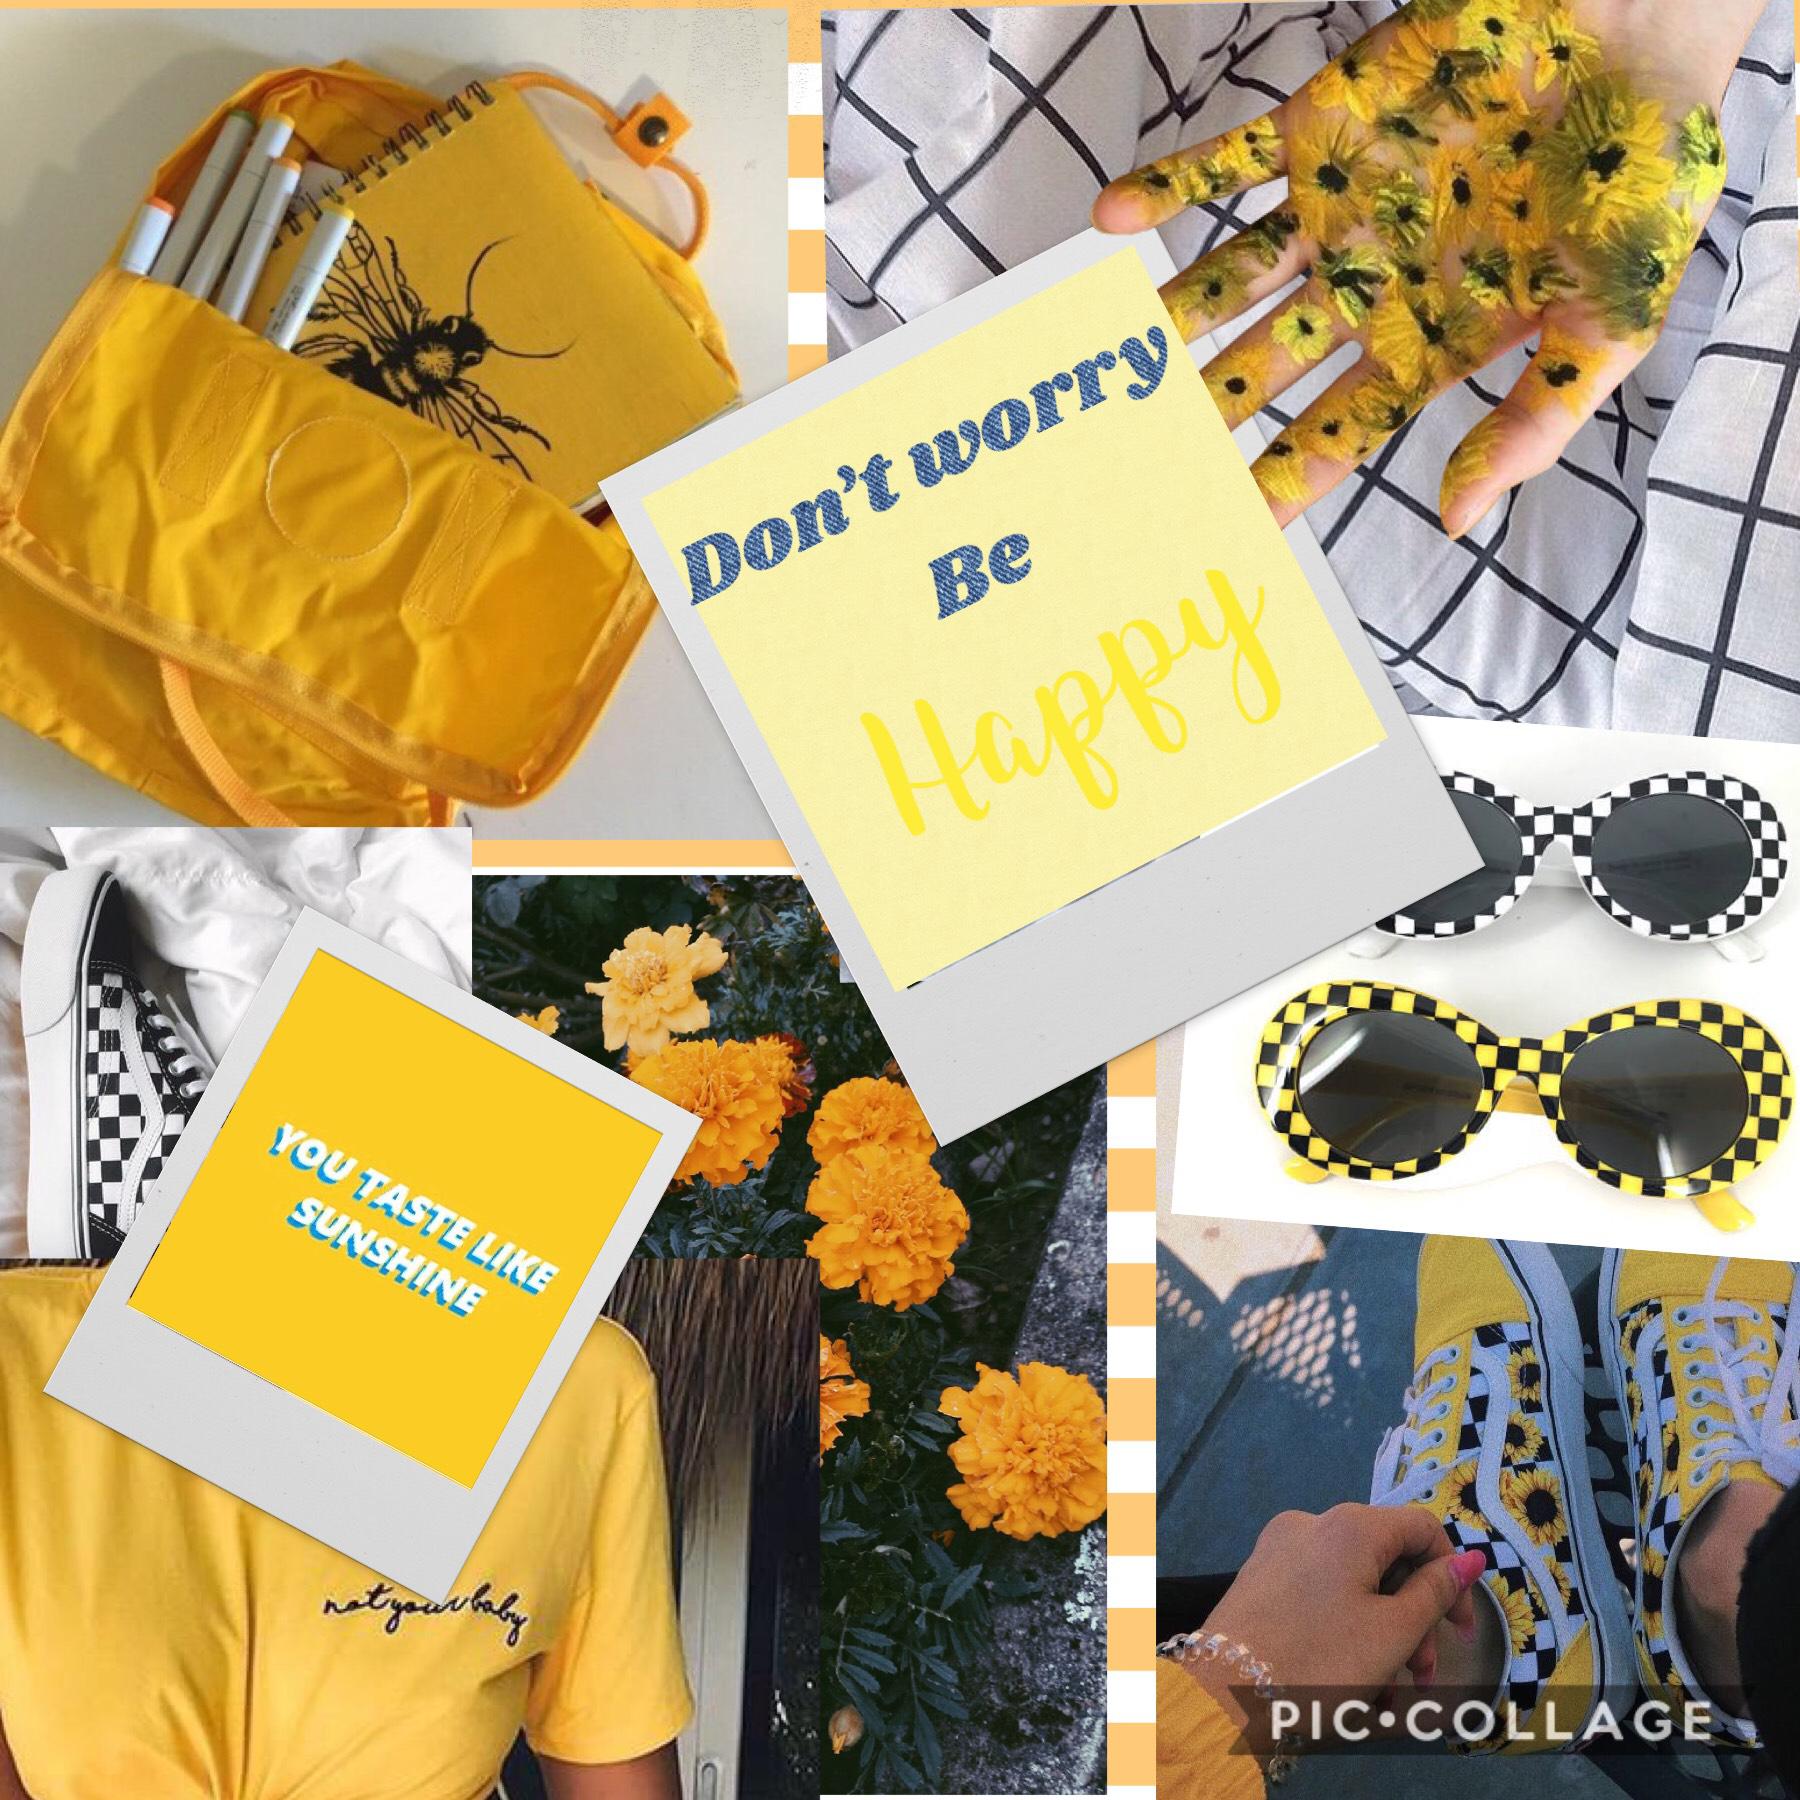 🌼Tap🌼

💛💛Sunshine💛💛
🍊What’s Your Favorite Color?🍊